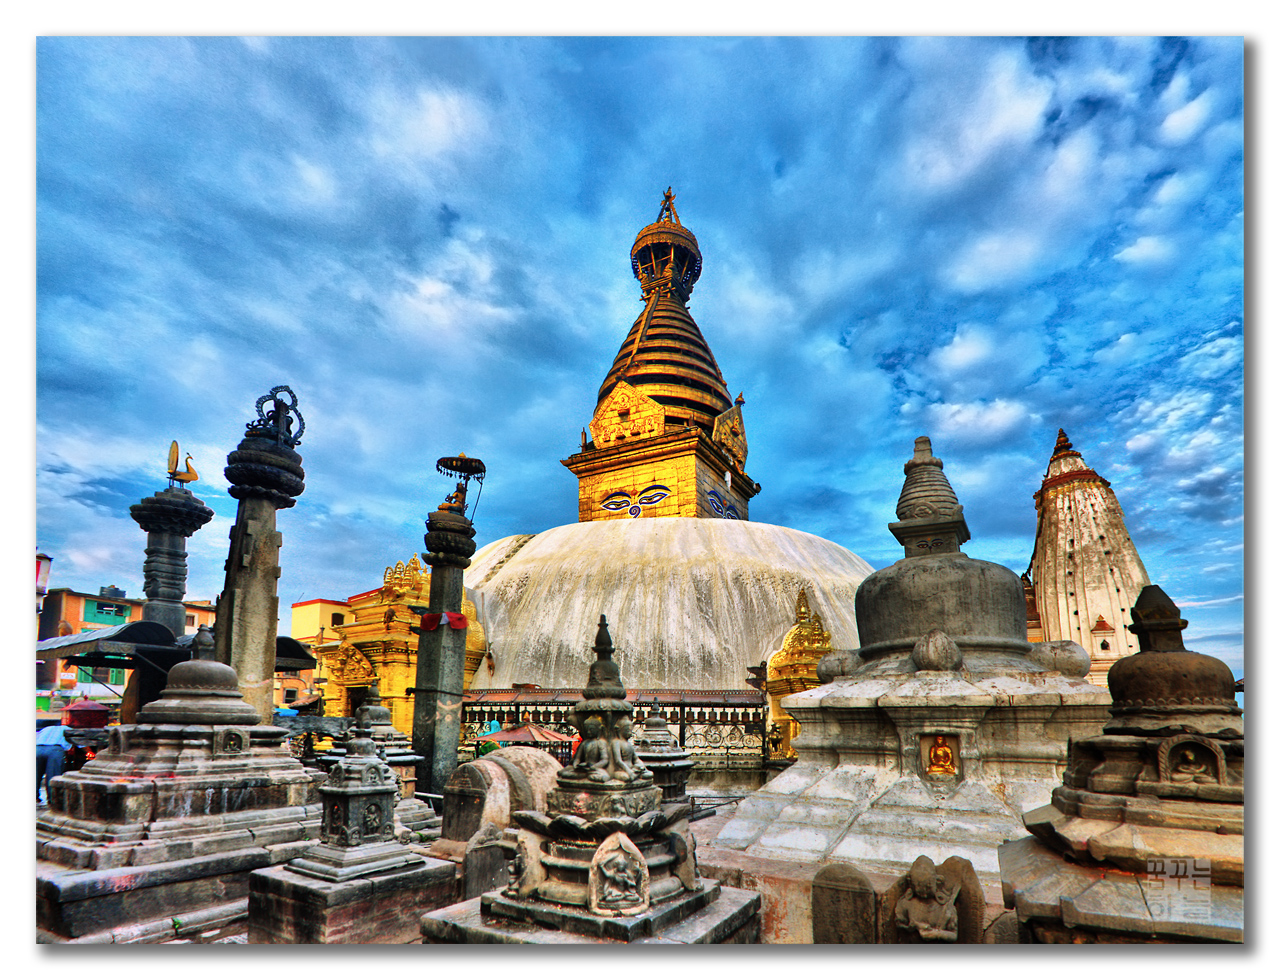 Nepal Tour Packages from Nagpur